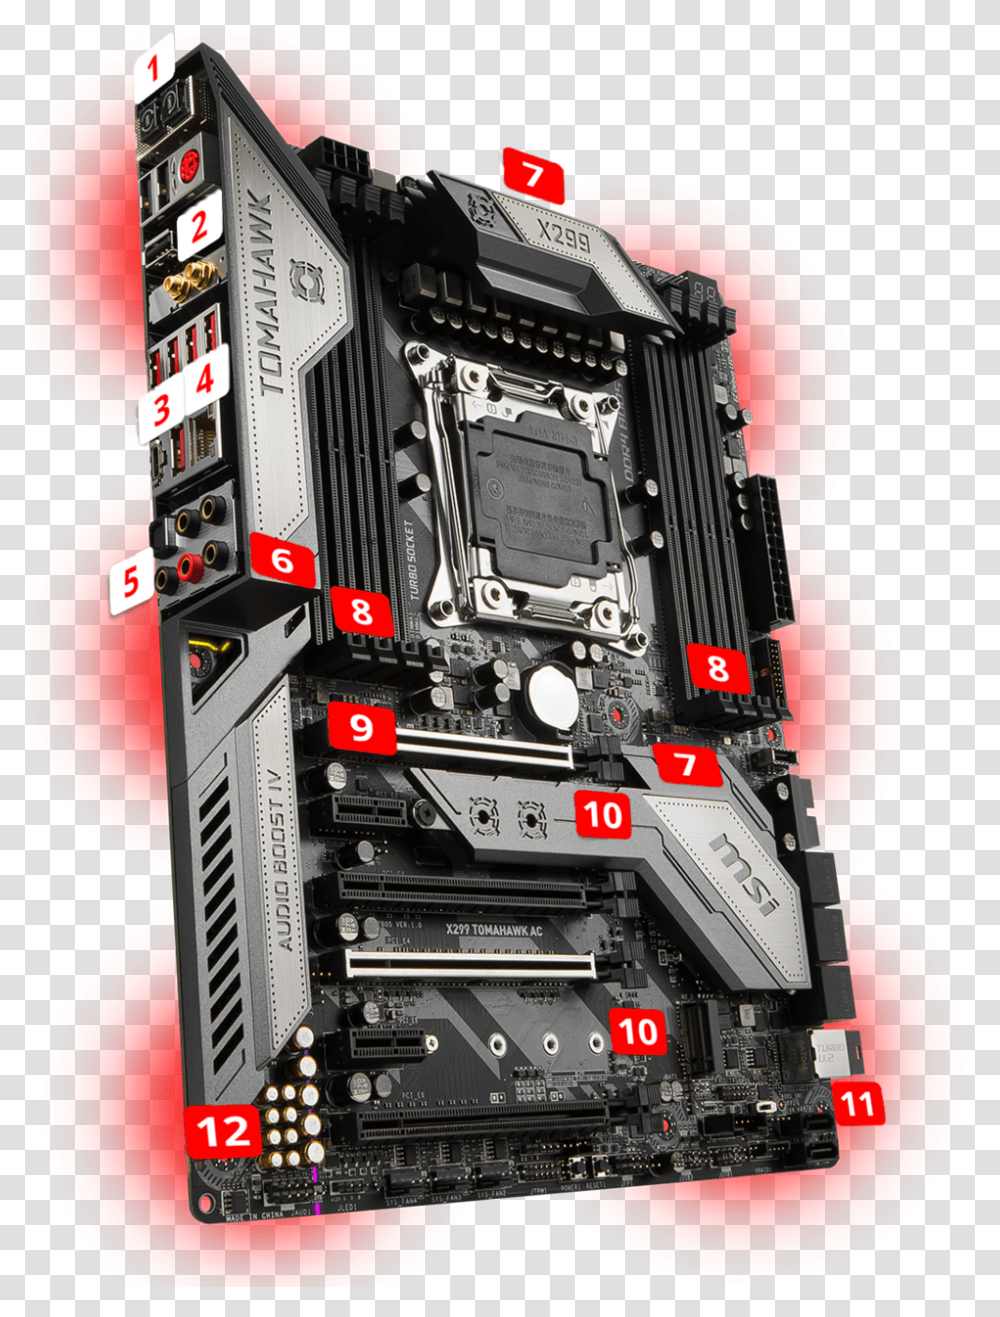 Msi Atx Tomahawk Ac Motherboard Computer Alliance, Fire Truck, Vehicle, Transportation, Electronics Transparent Png